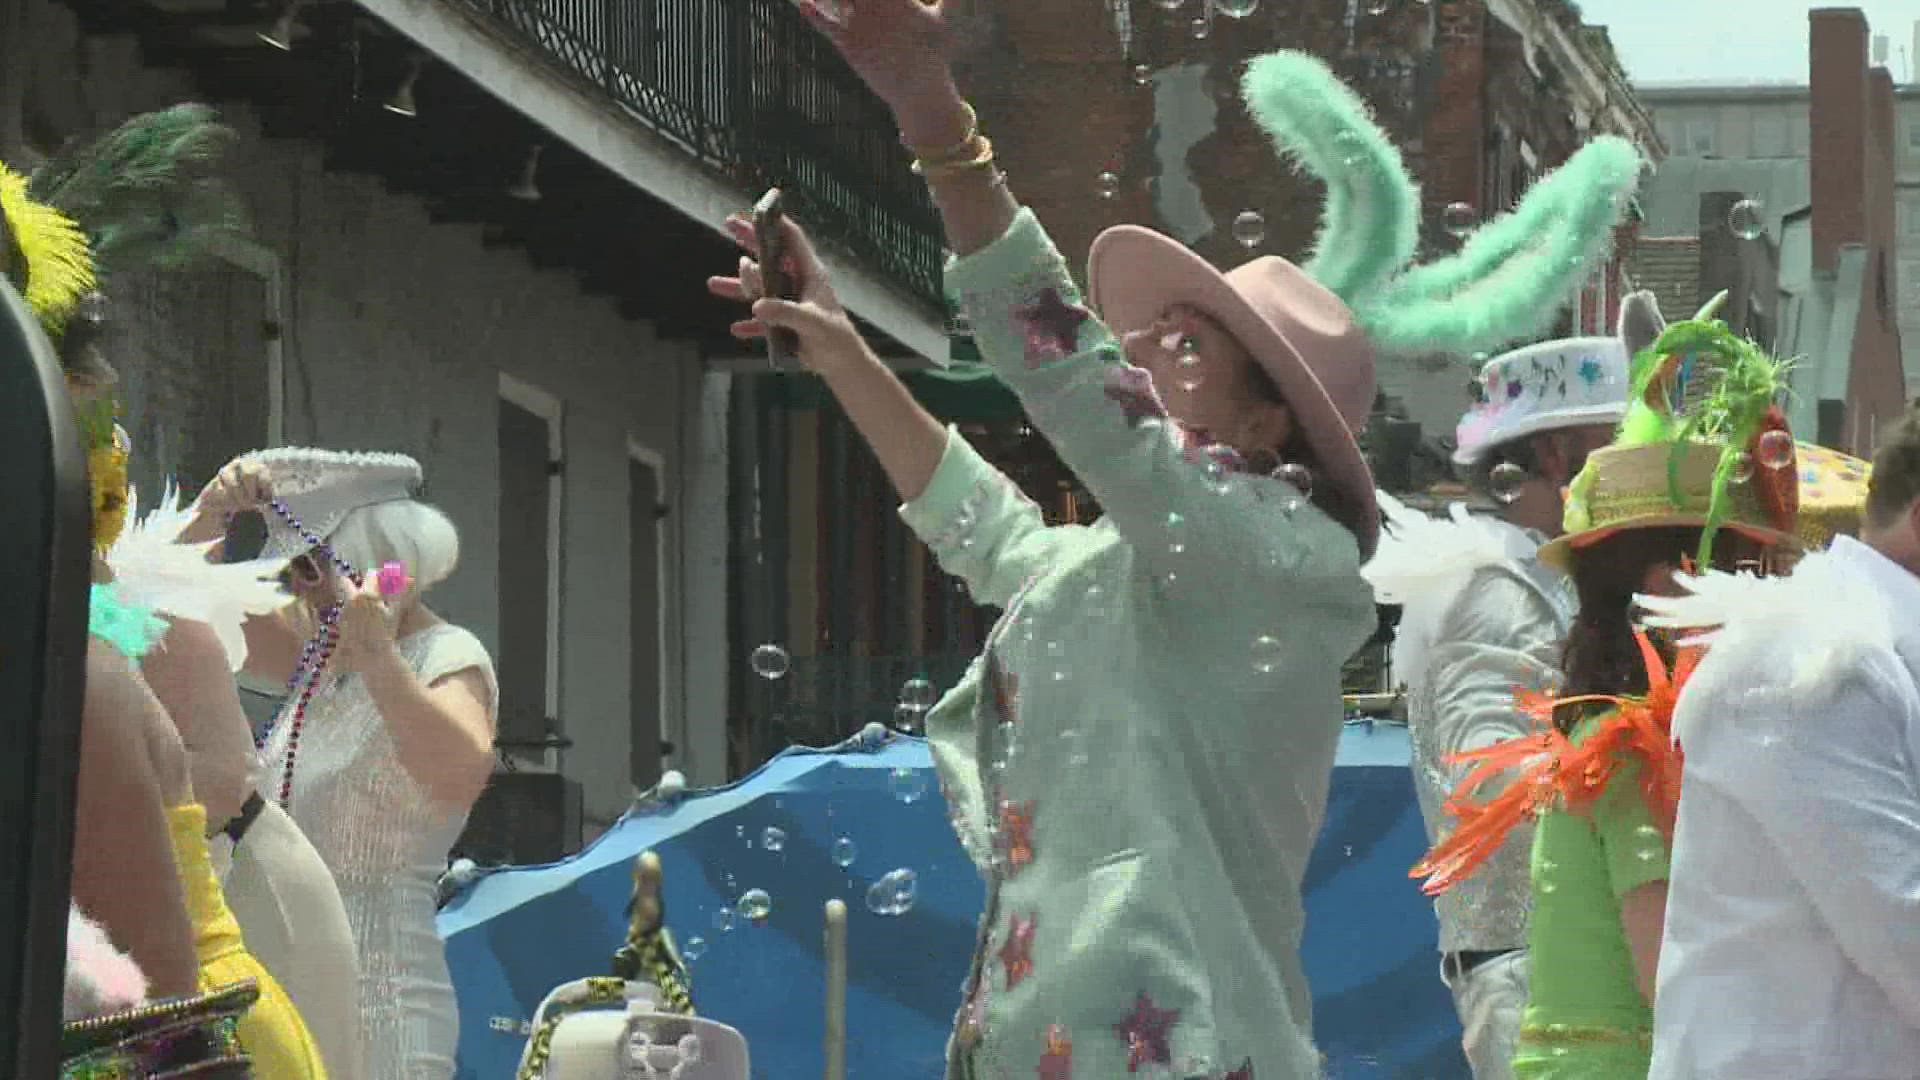 Chris Owens passed away about two weeks ago but her annual Easter parade went on as planned to the delight of many.